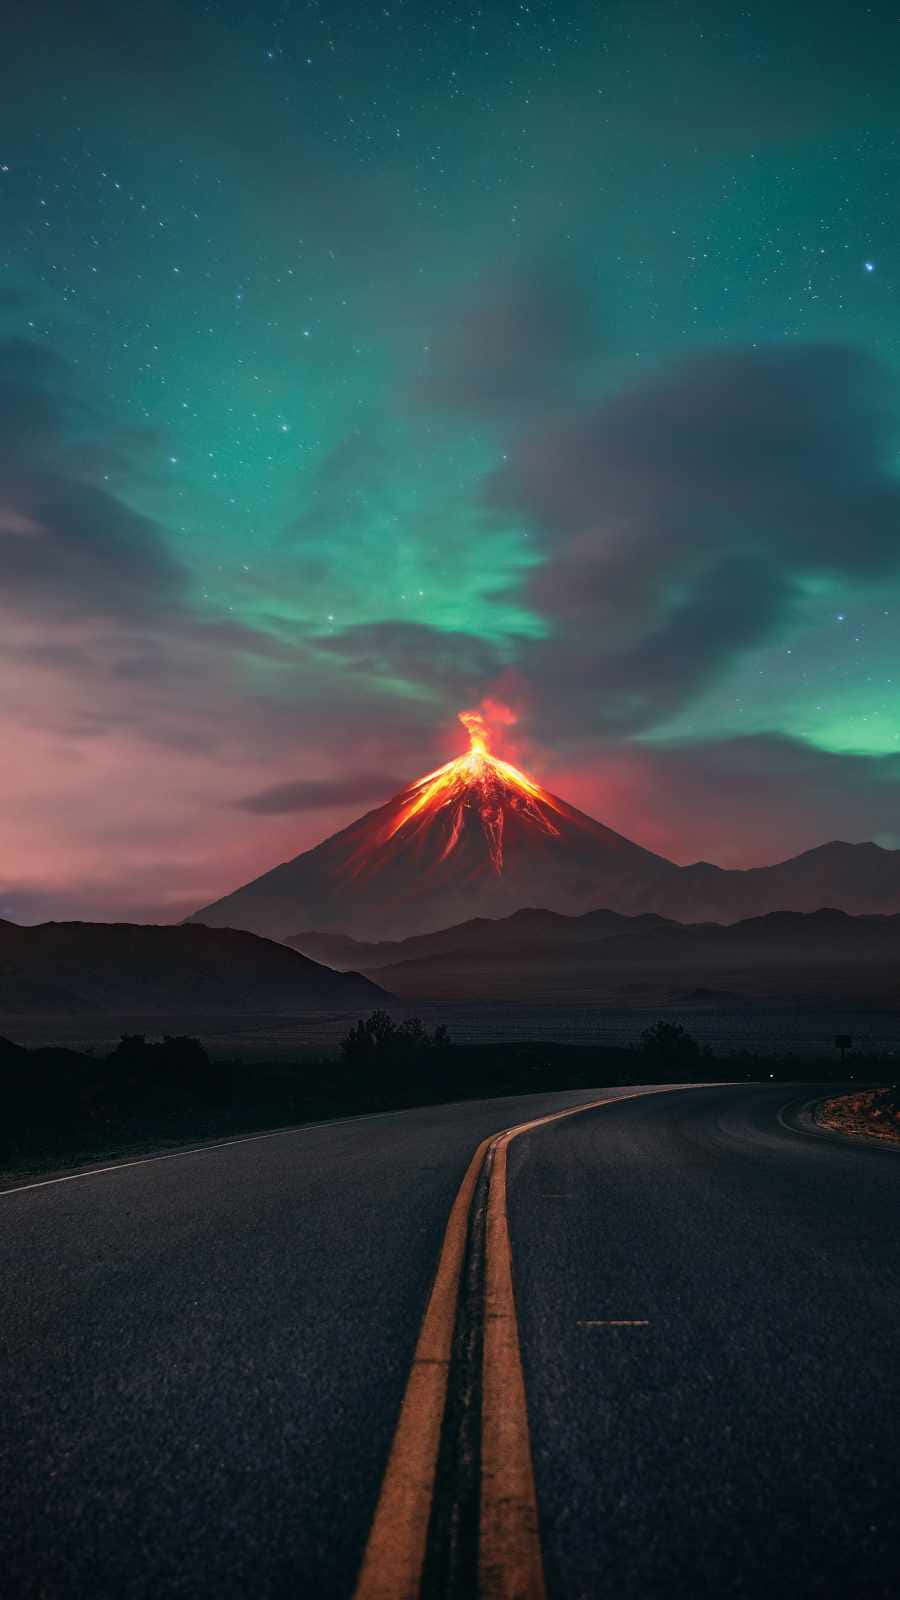 Awe-inspiring Image of a Road Trip to an Active Volcano Wallpaper